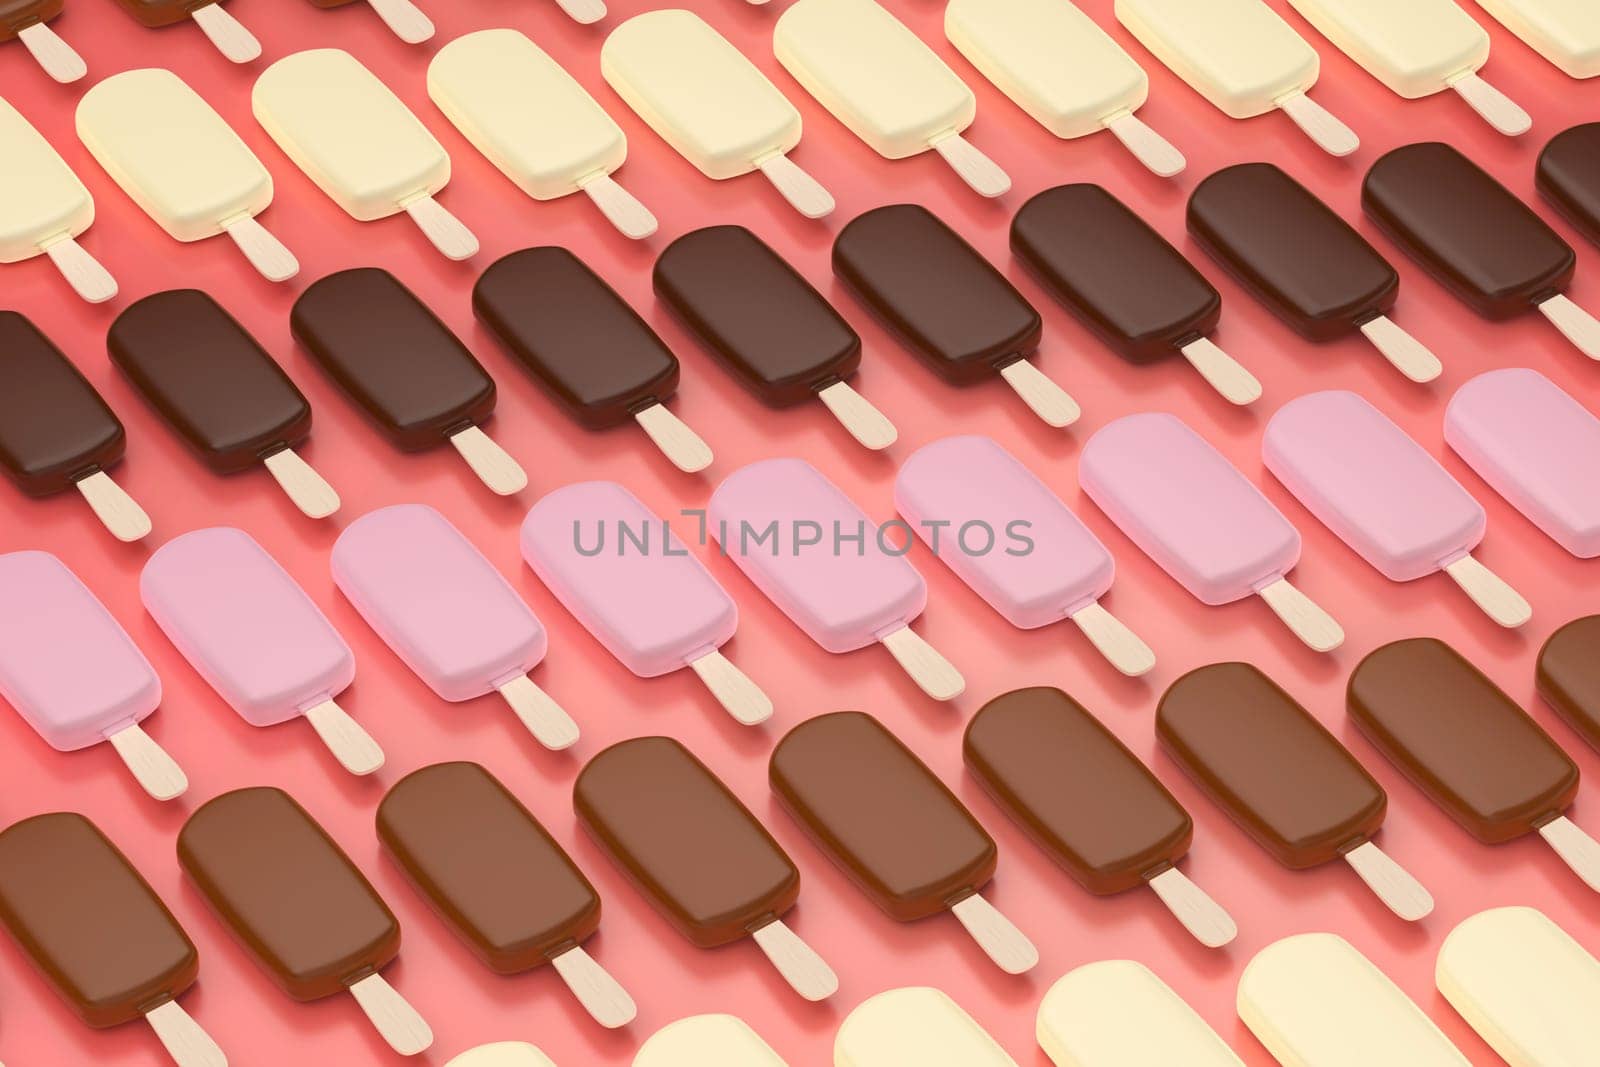 Many chocolate ice creams
 by magraphics